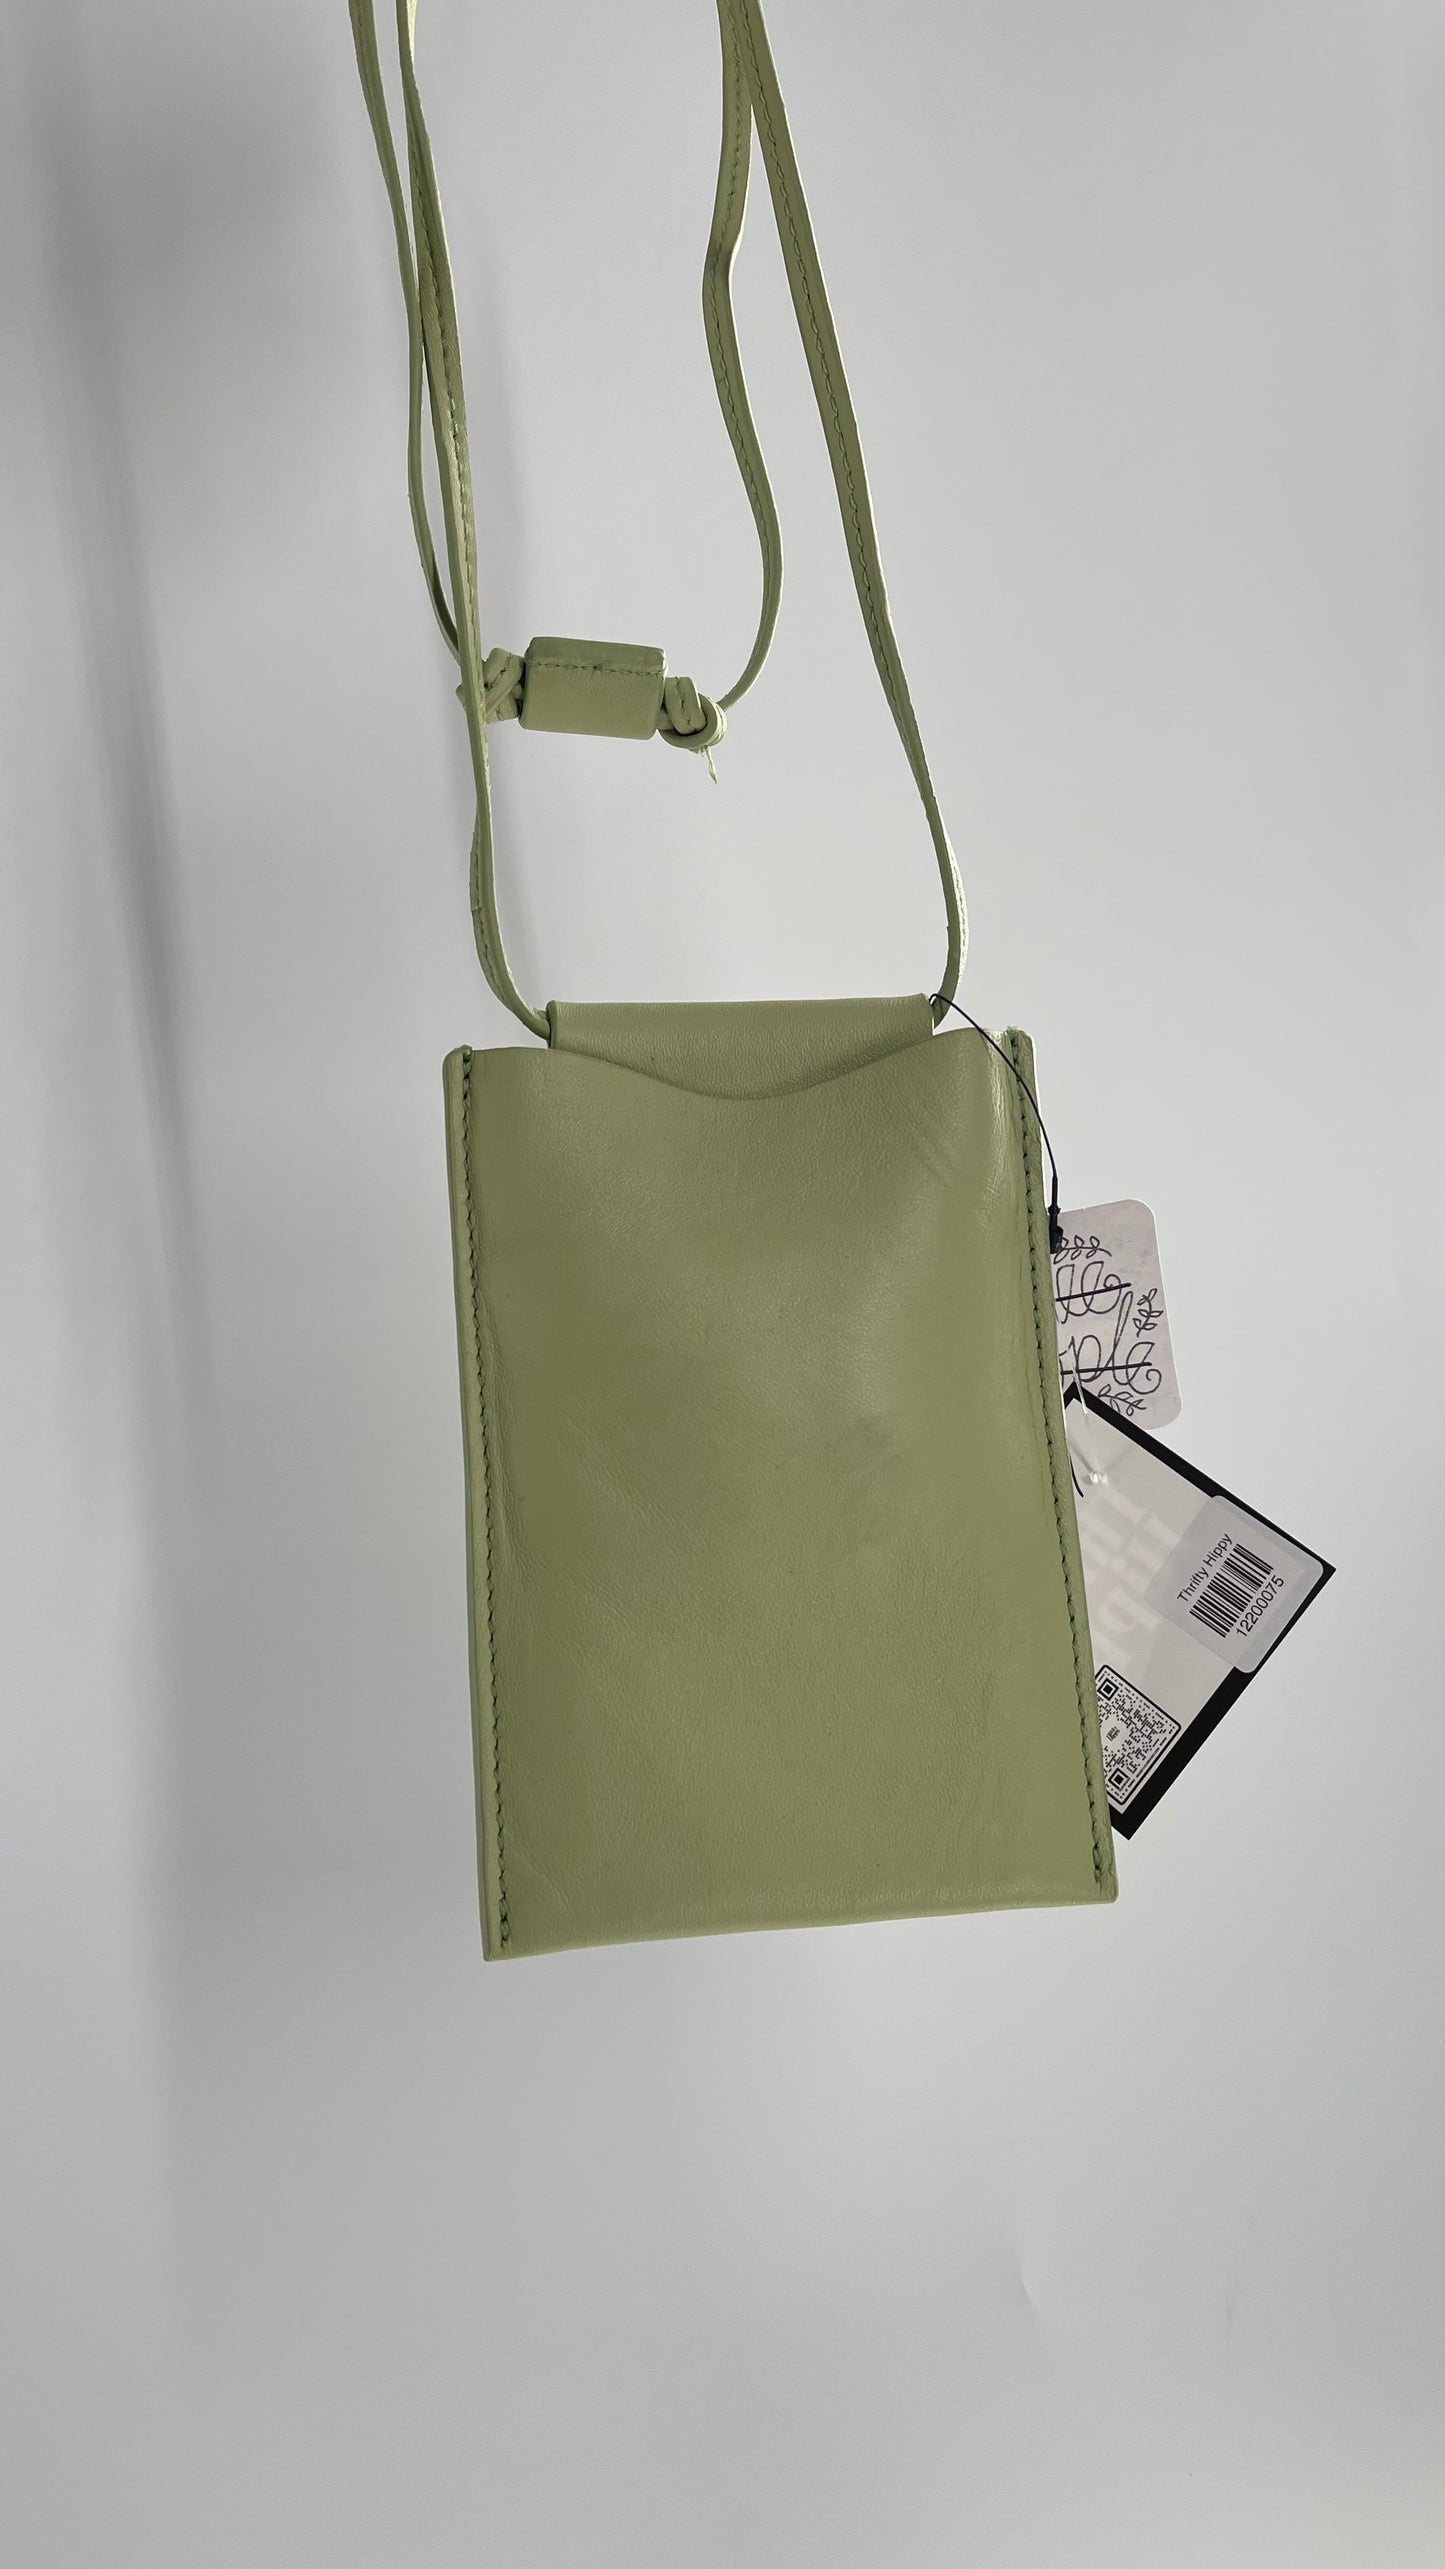 Free People Sage Green Crossbody Phone Pouch with Tags Attached